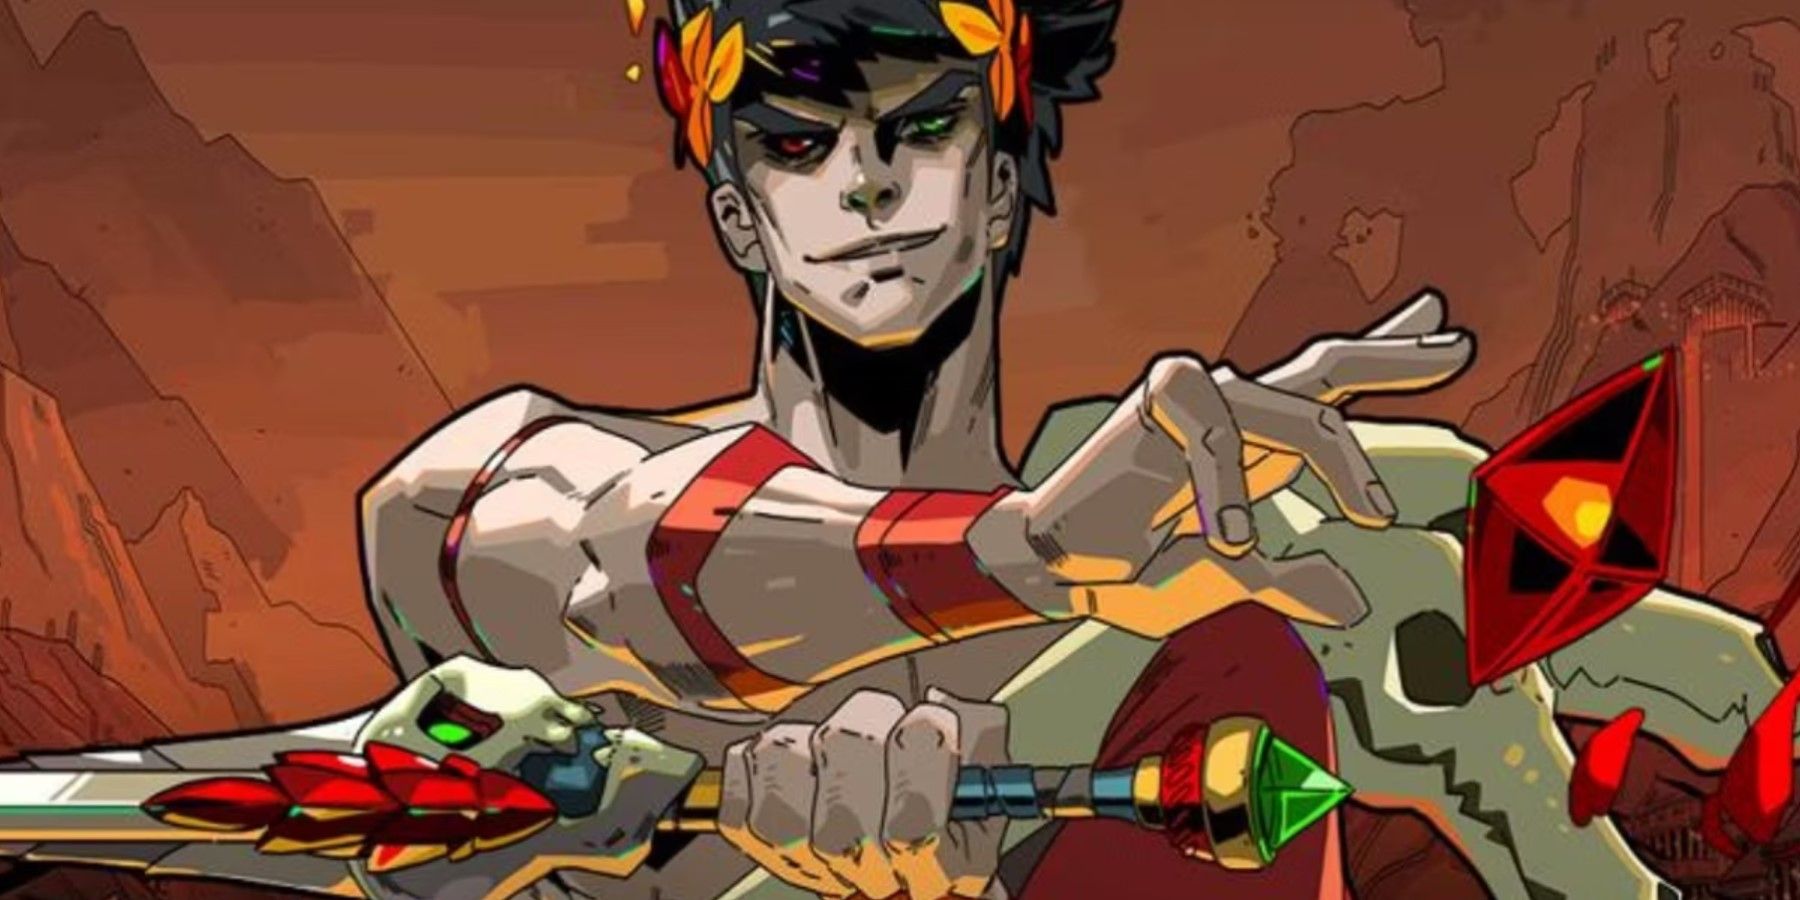 Zagreus holds the sword of Hades